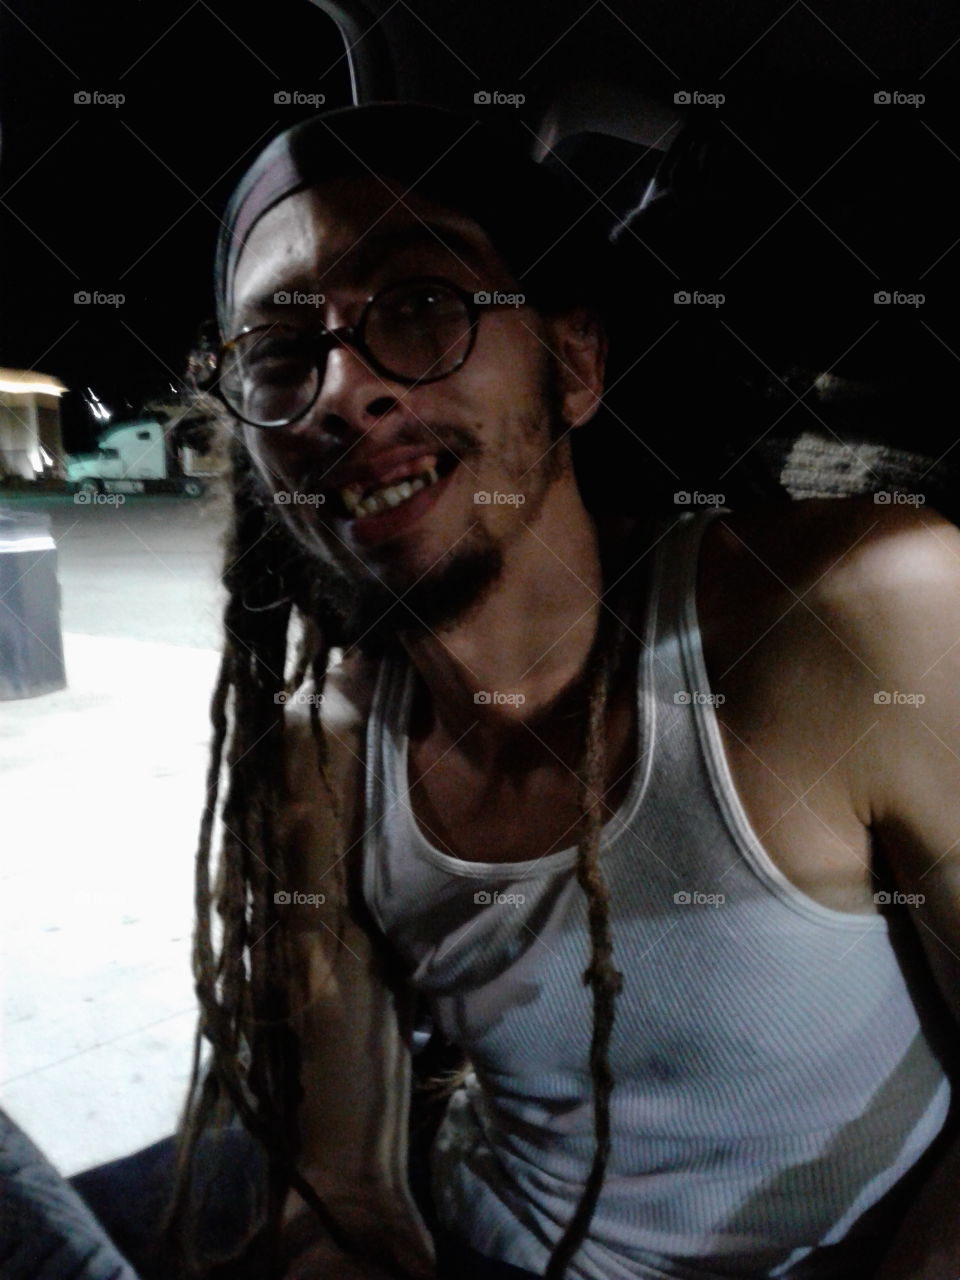 Traveler with dreads.